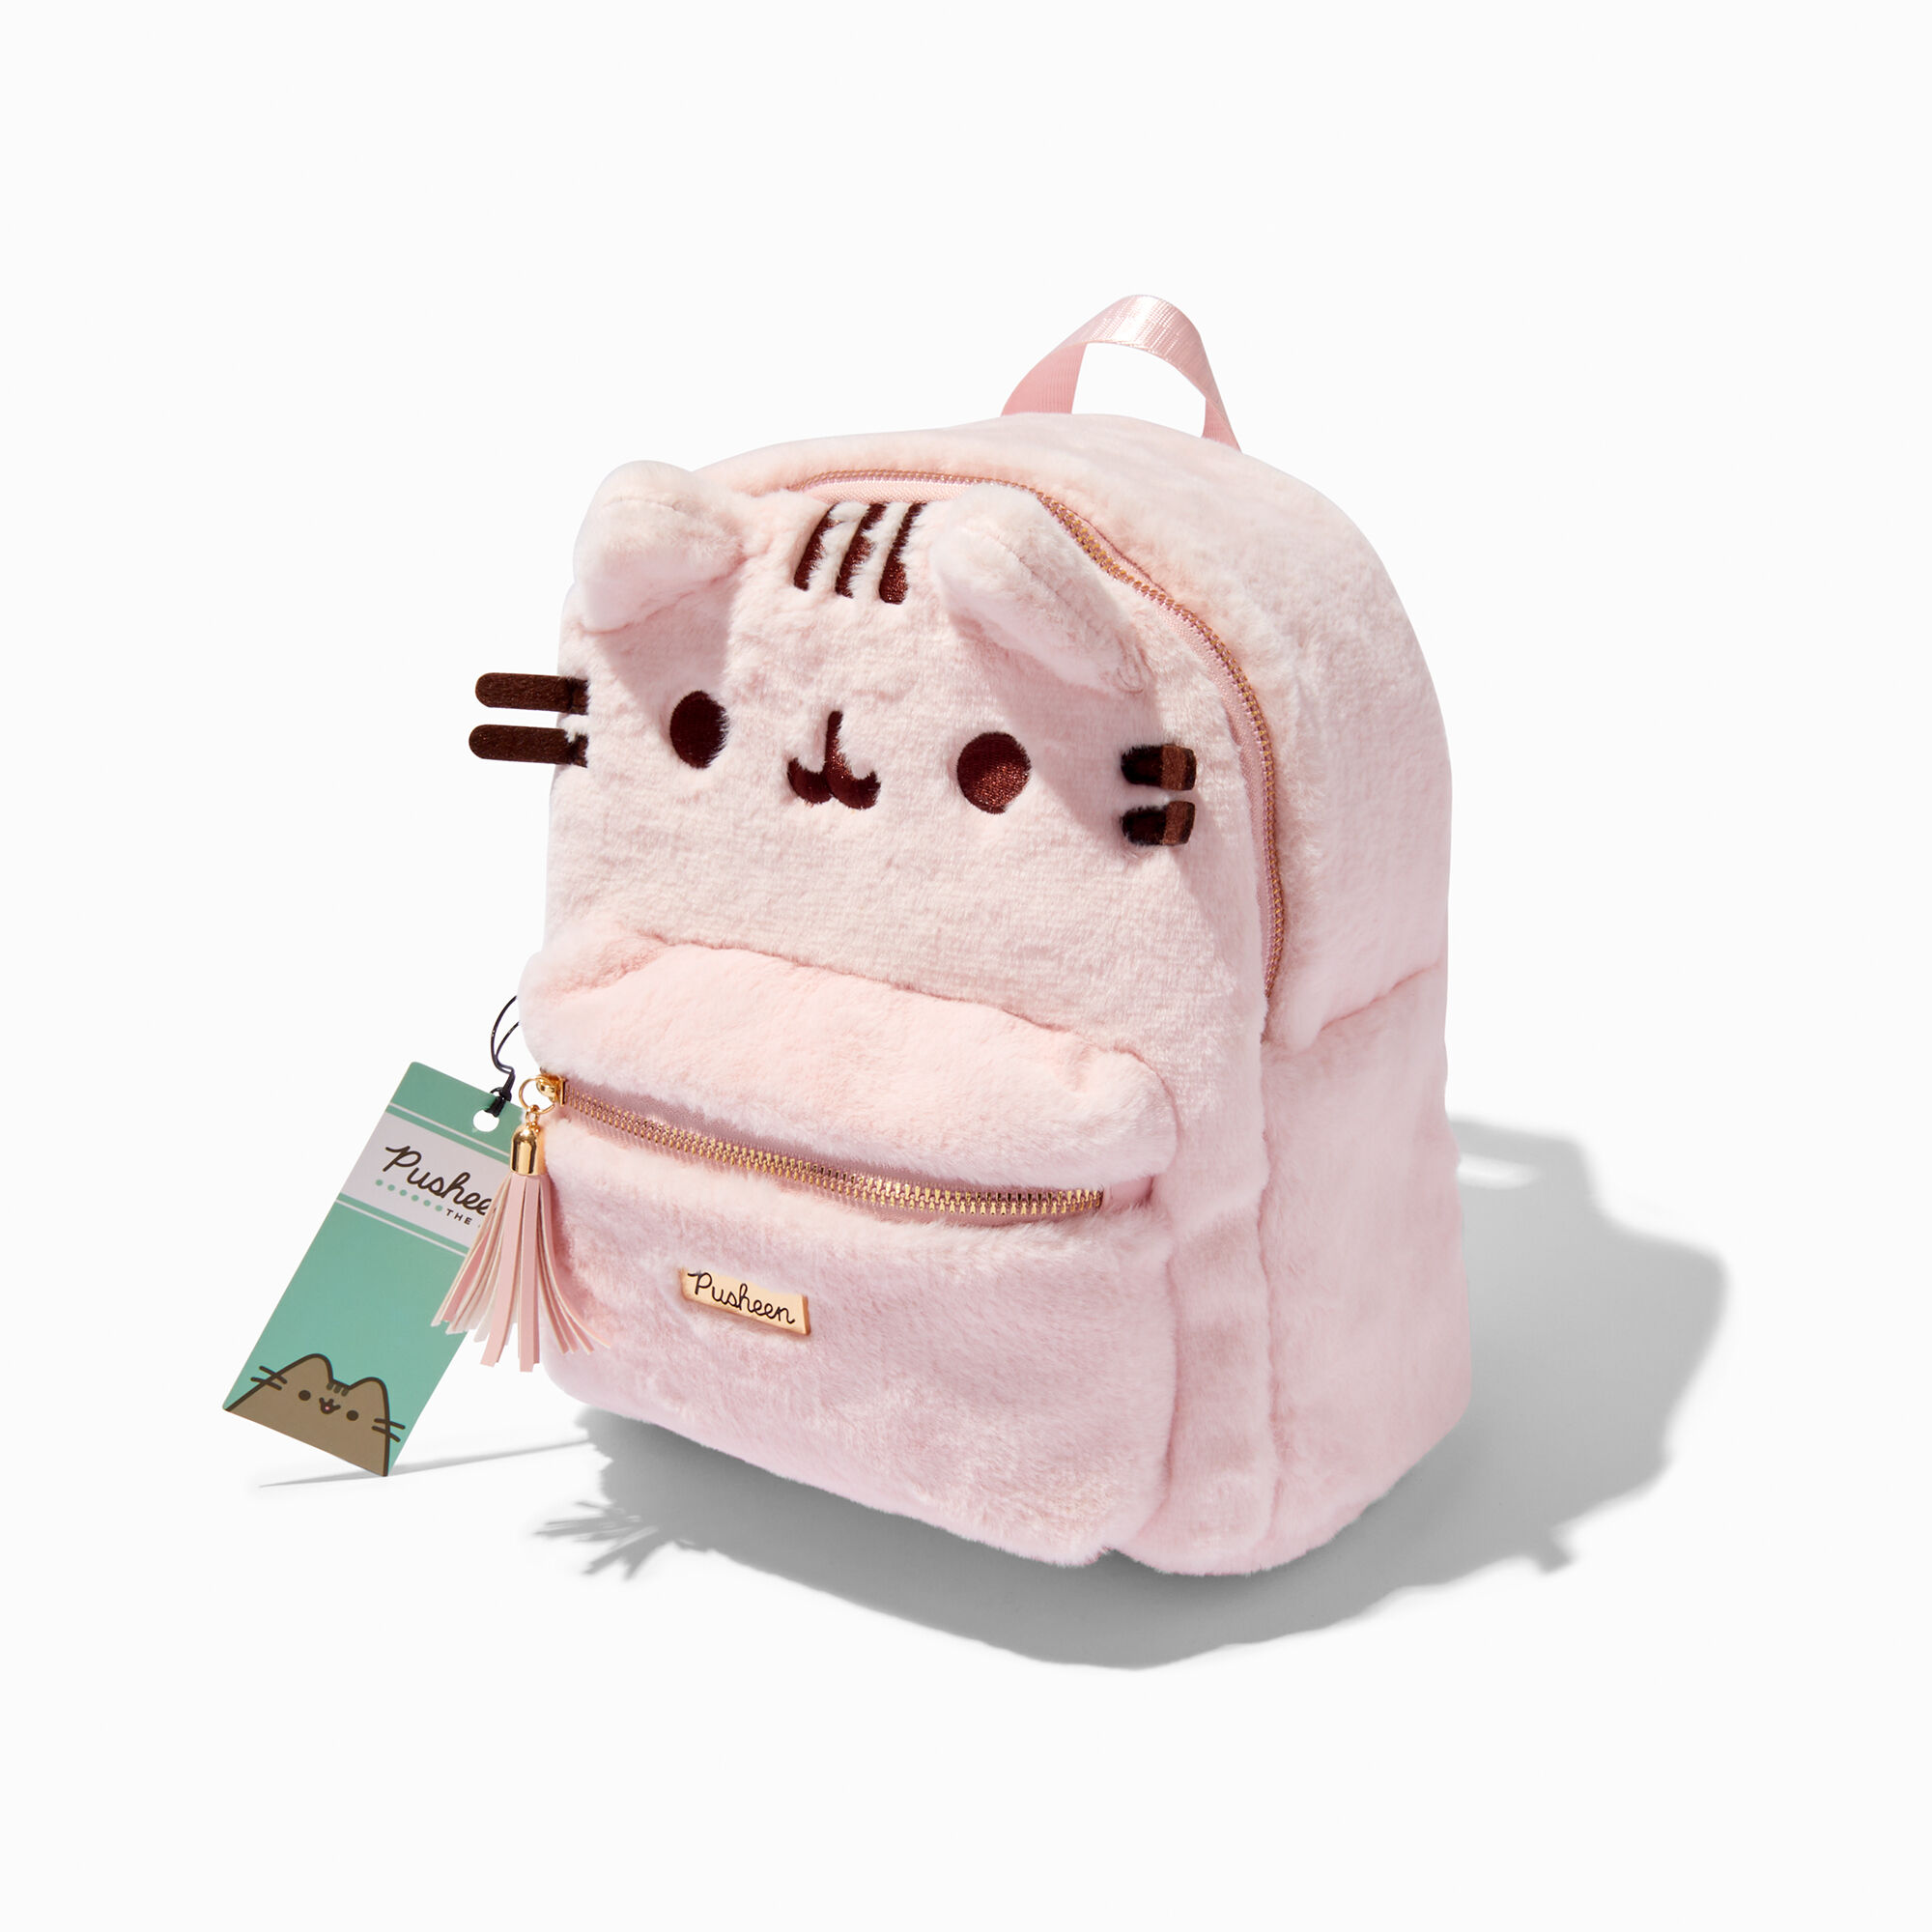 View Claires Pusheen Fuzzy Backpack Pink information